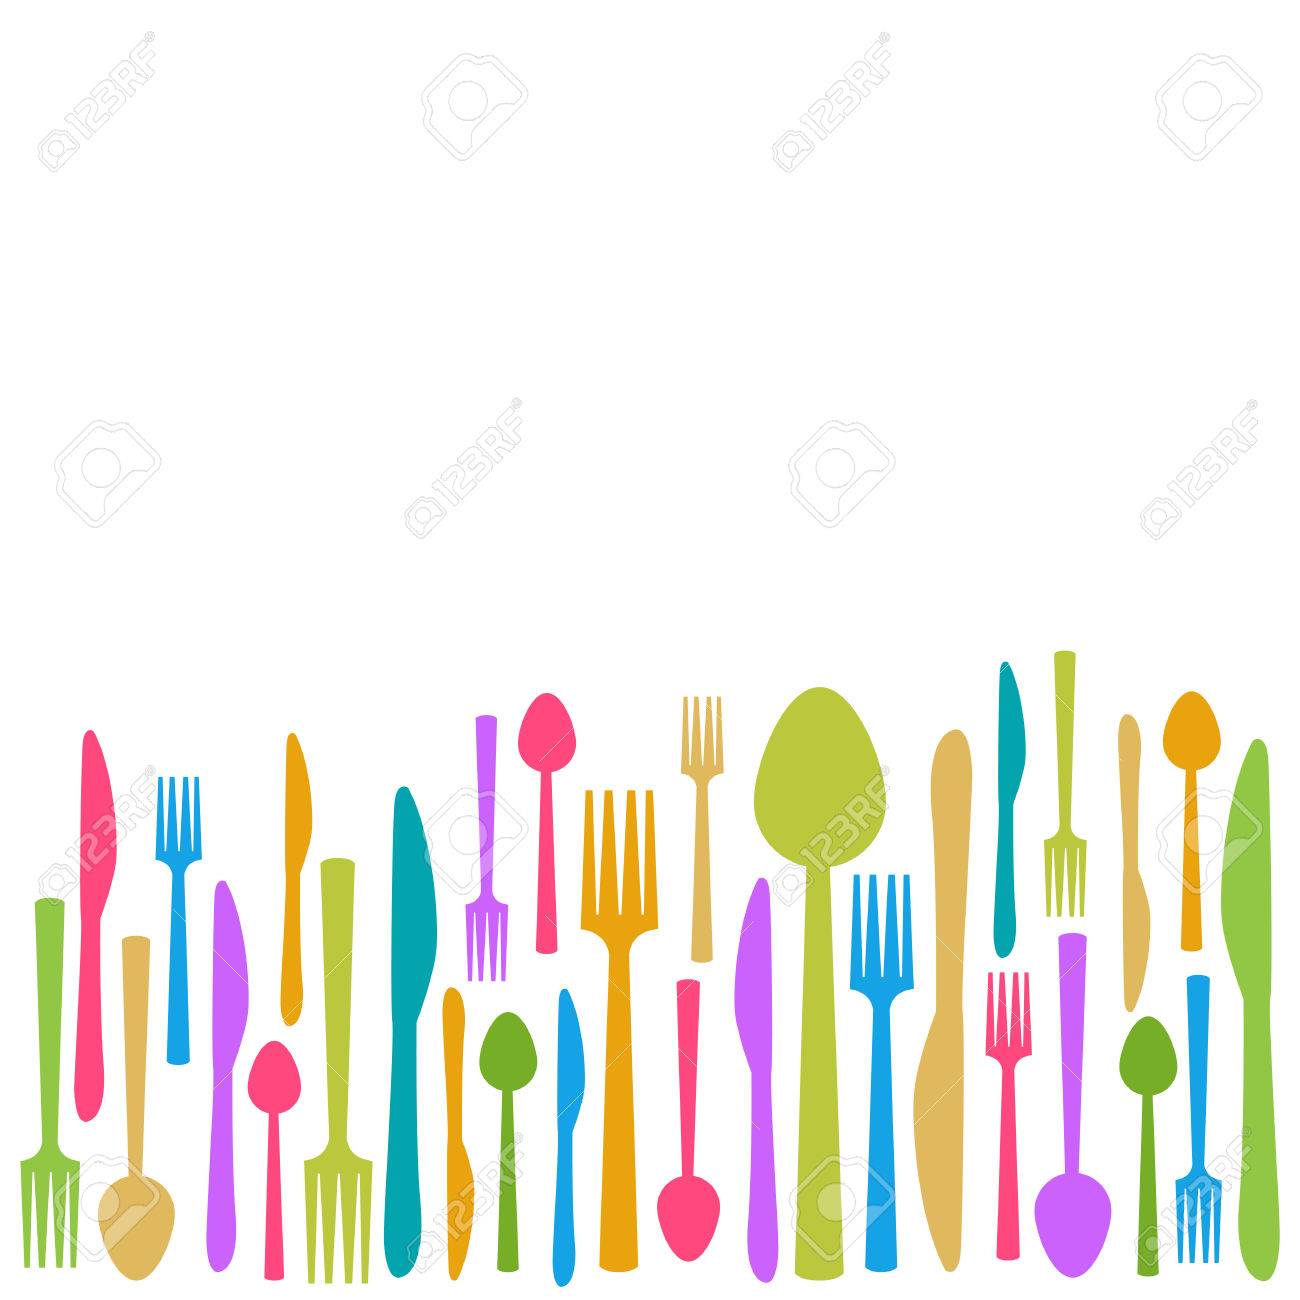 Fork Knife Spoon Abstract Colorful Background Stock Photo Picture